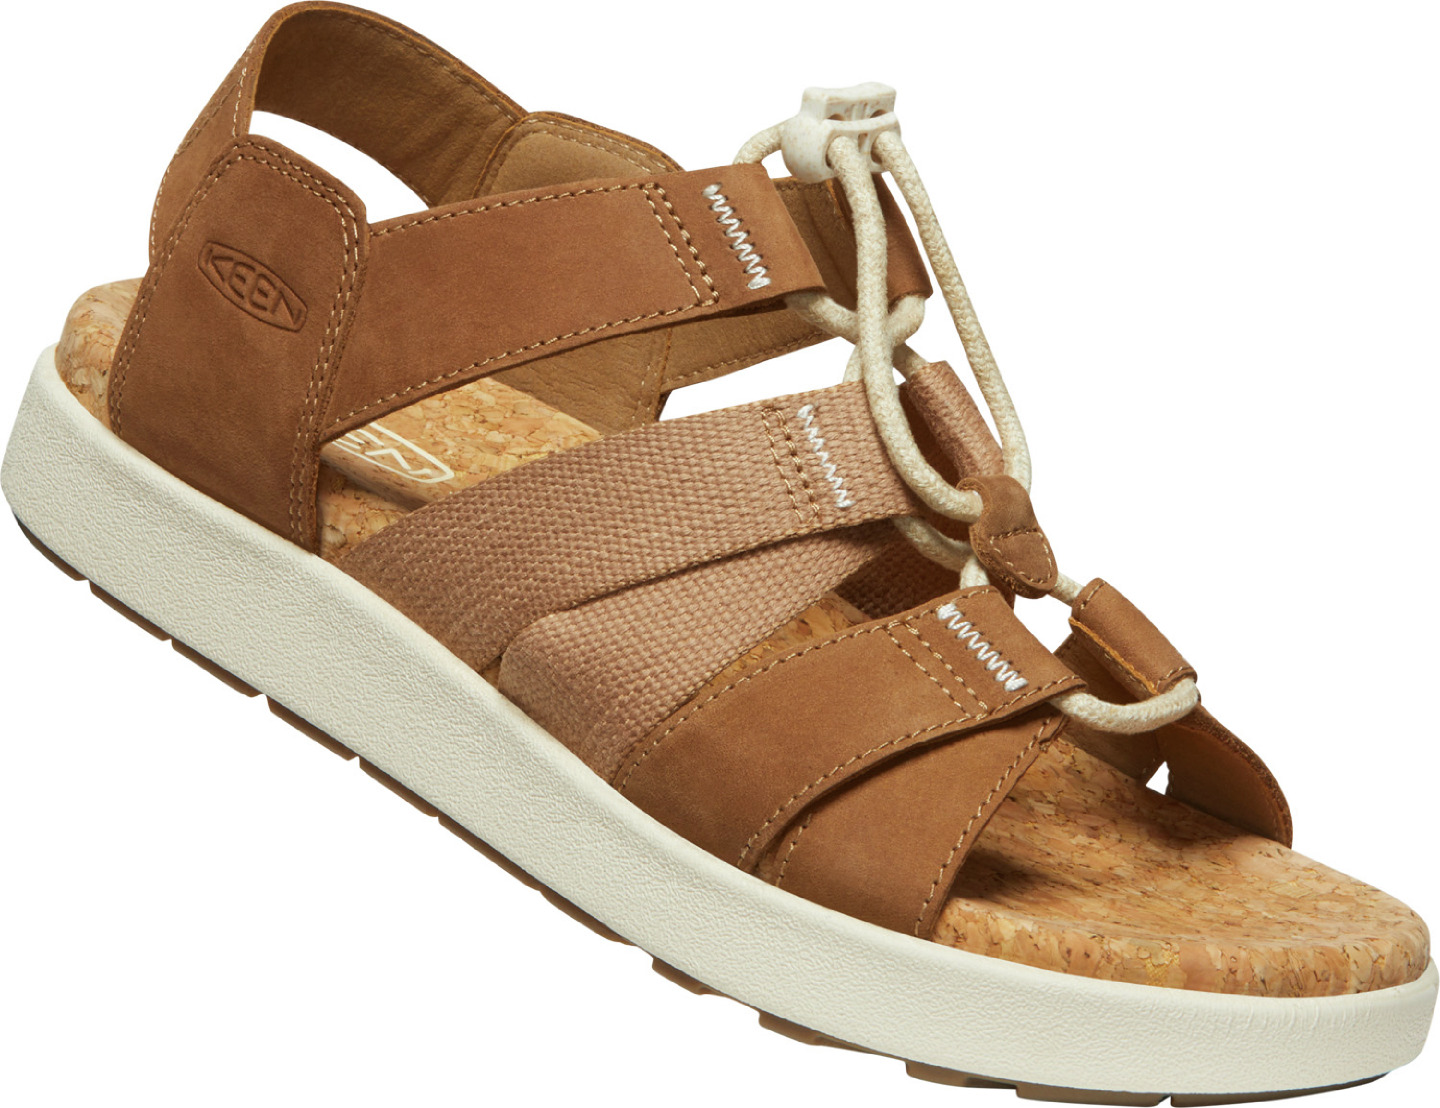 Sandály Keen ELLE MIXED STRAP WOMEN toasted coconut/birch US 9,5